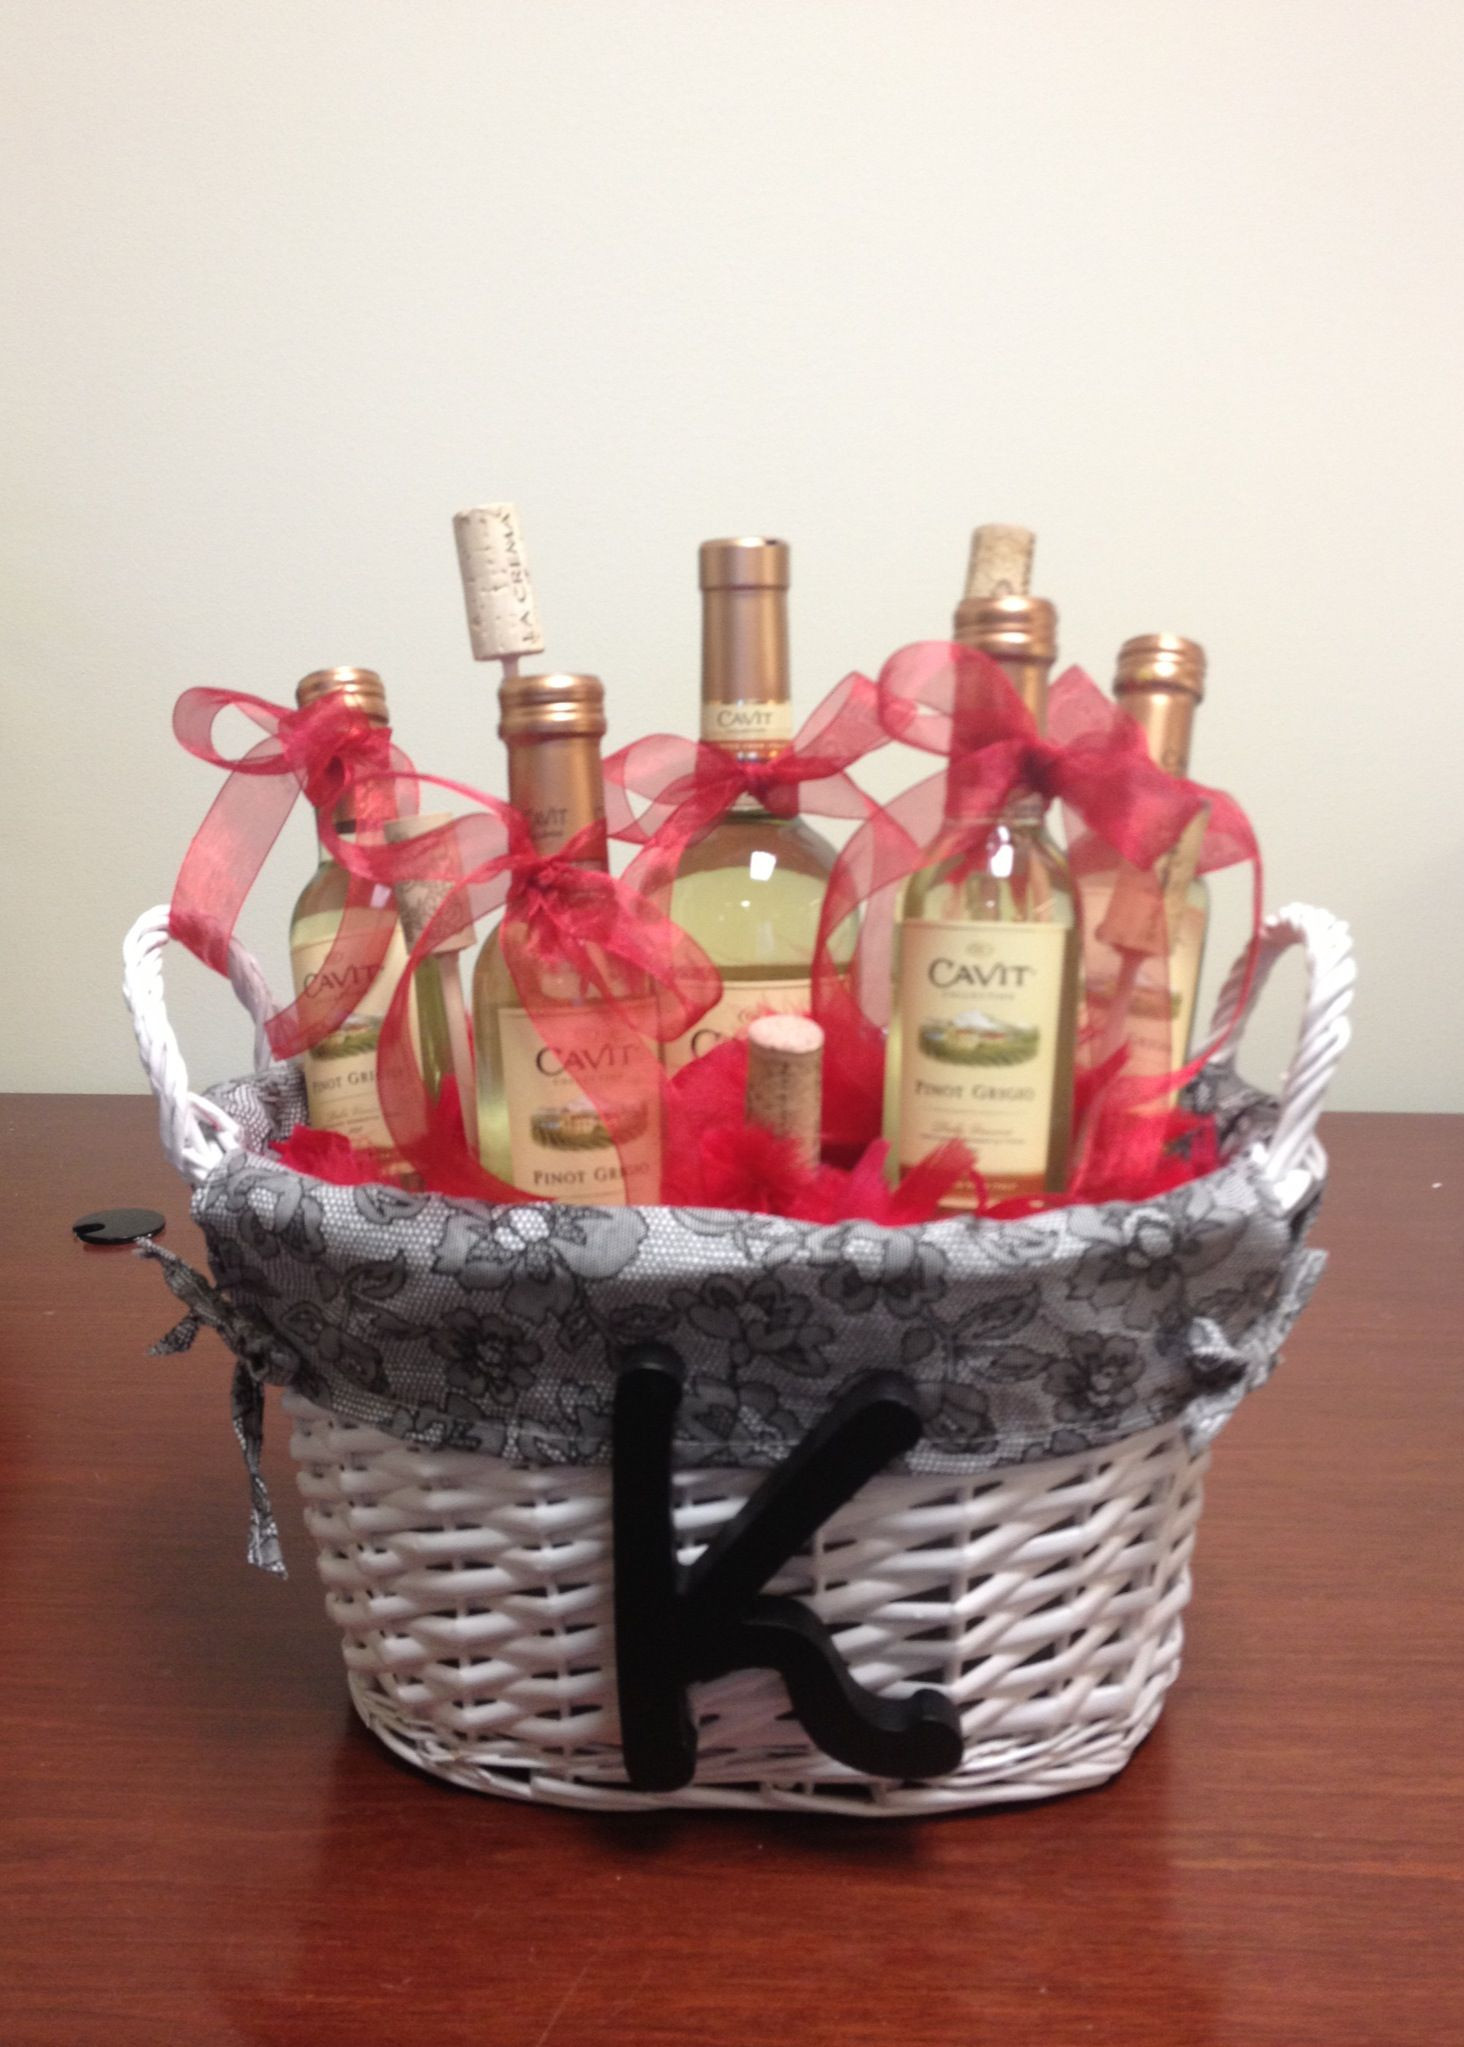 Champagne Gift Basket Ideas
 Wine t basket Made it for my friend